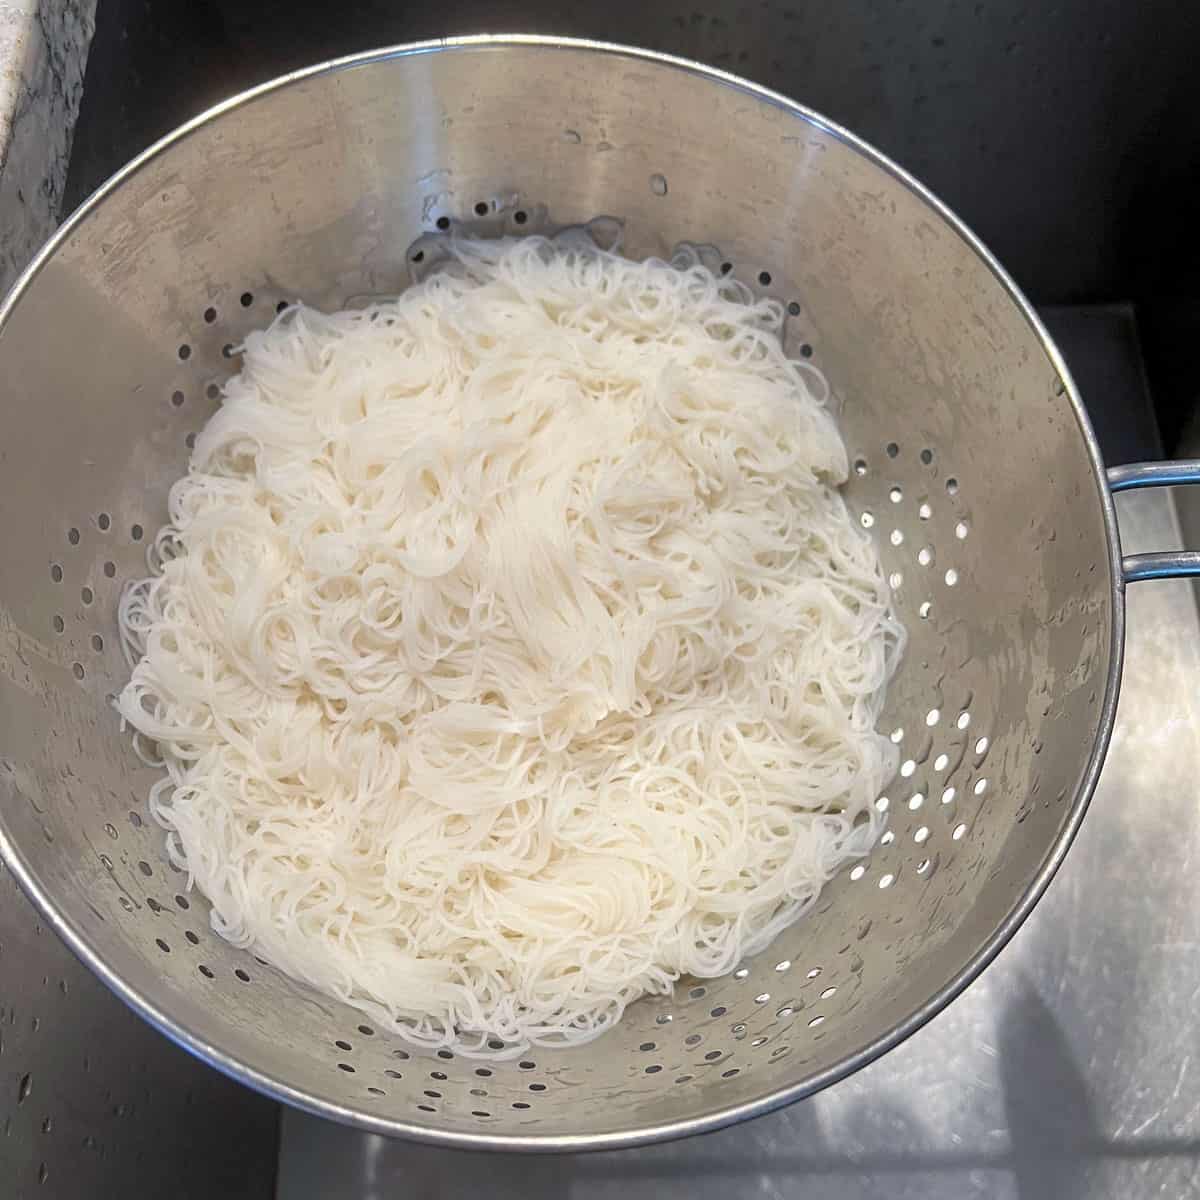 vermicelli rice noodles draining in a metal colander over the sink.